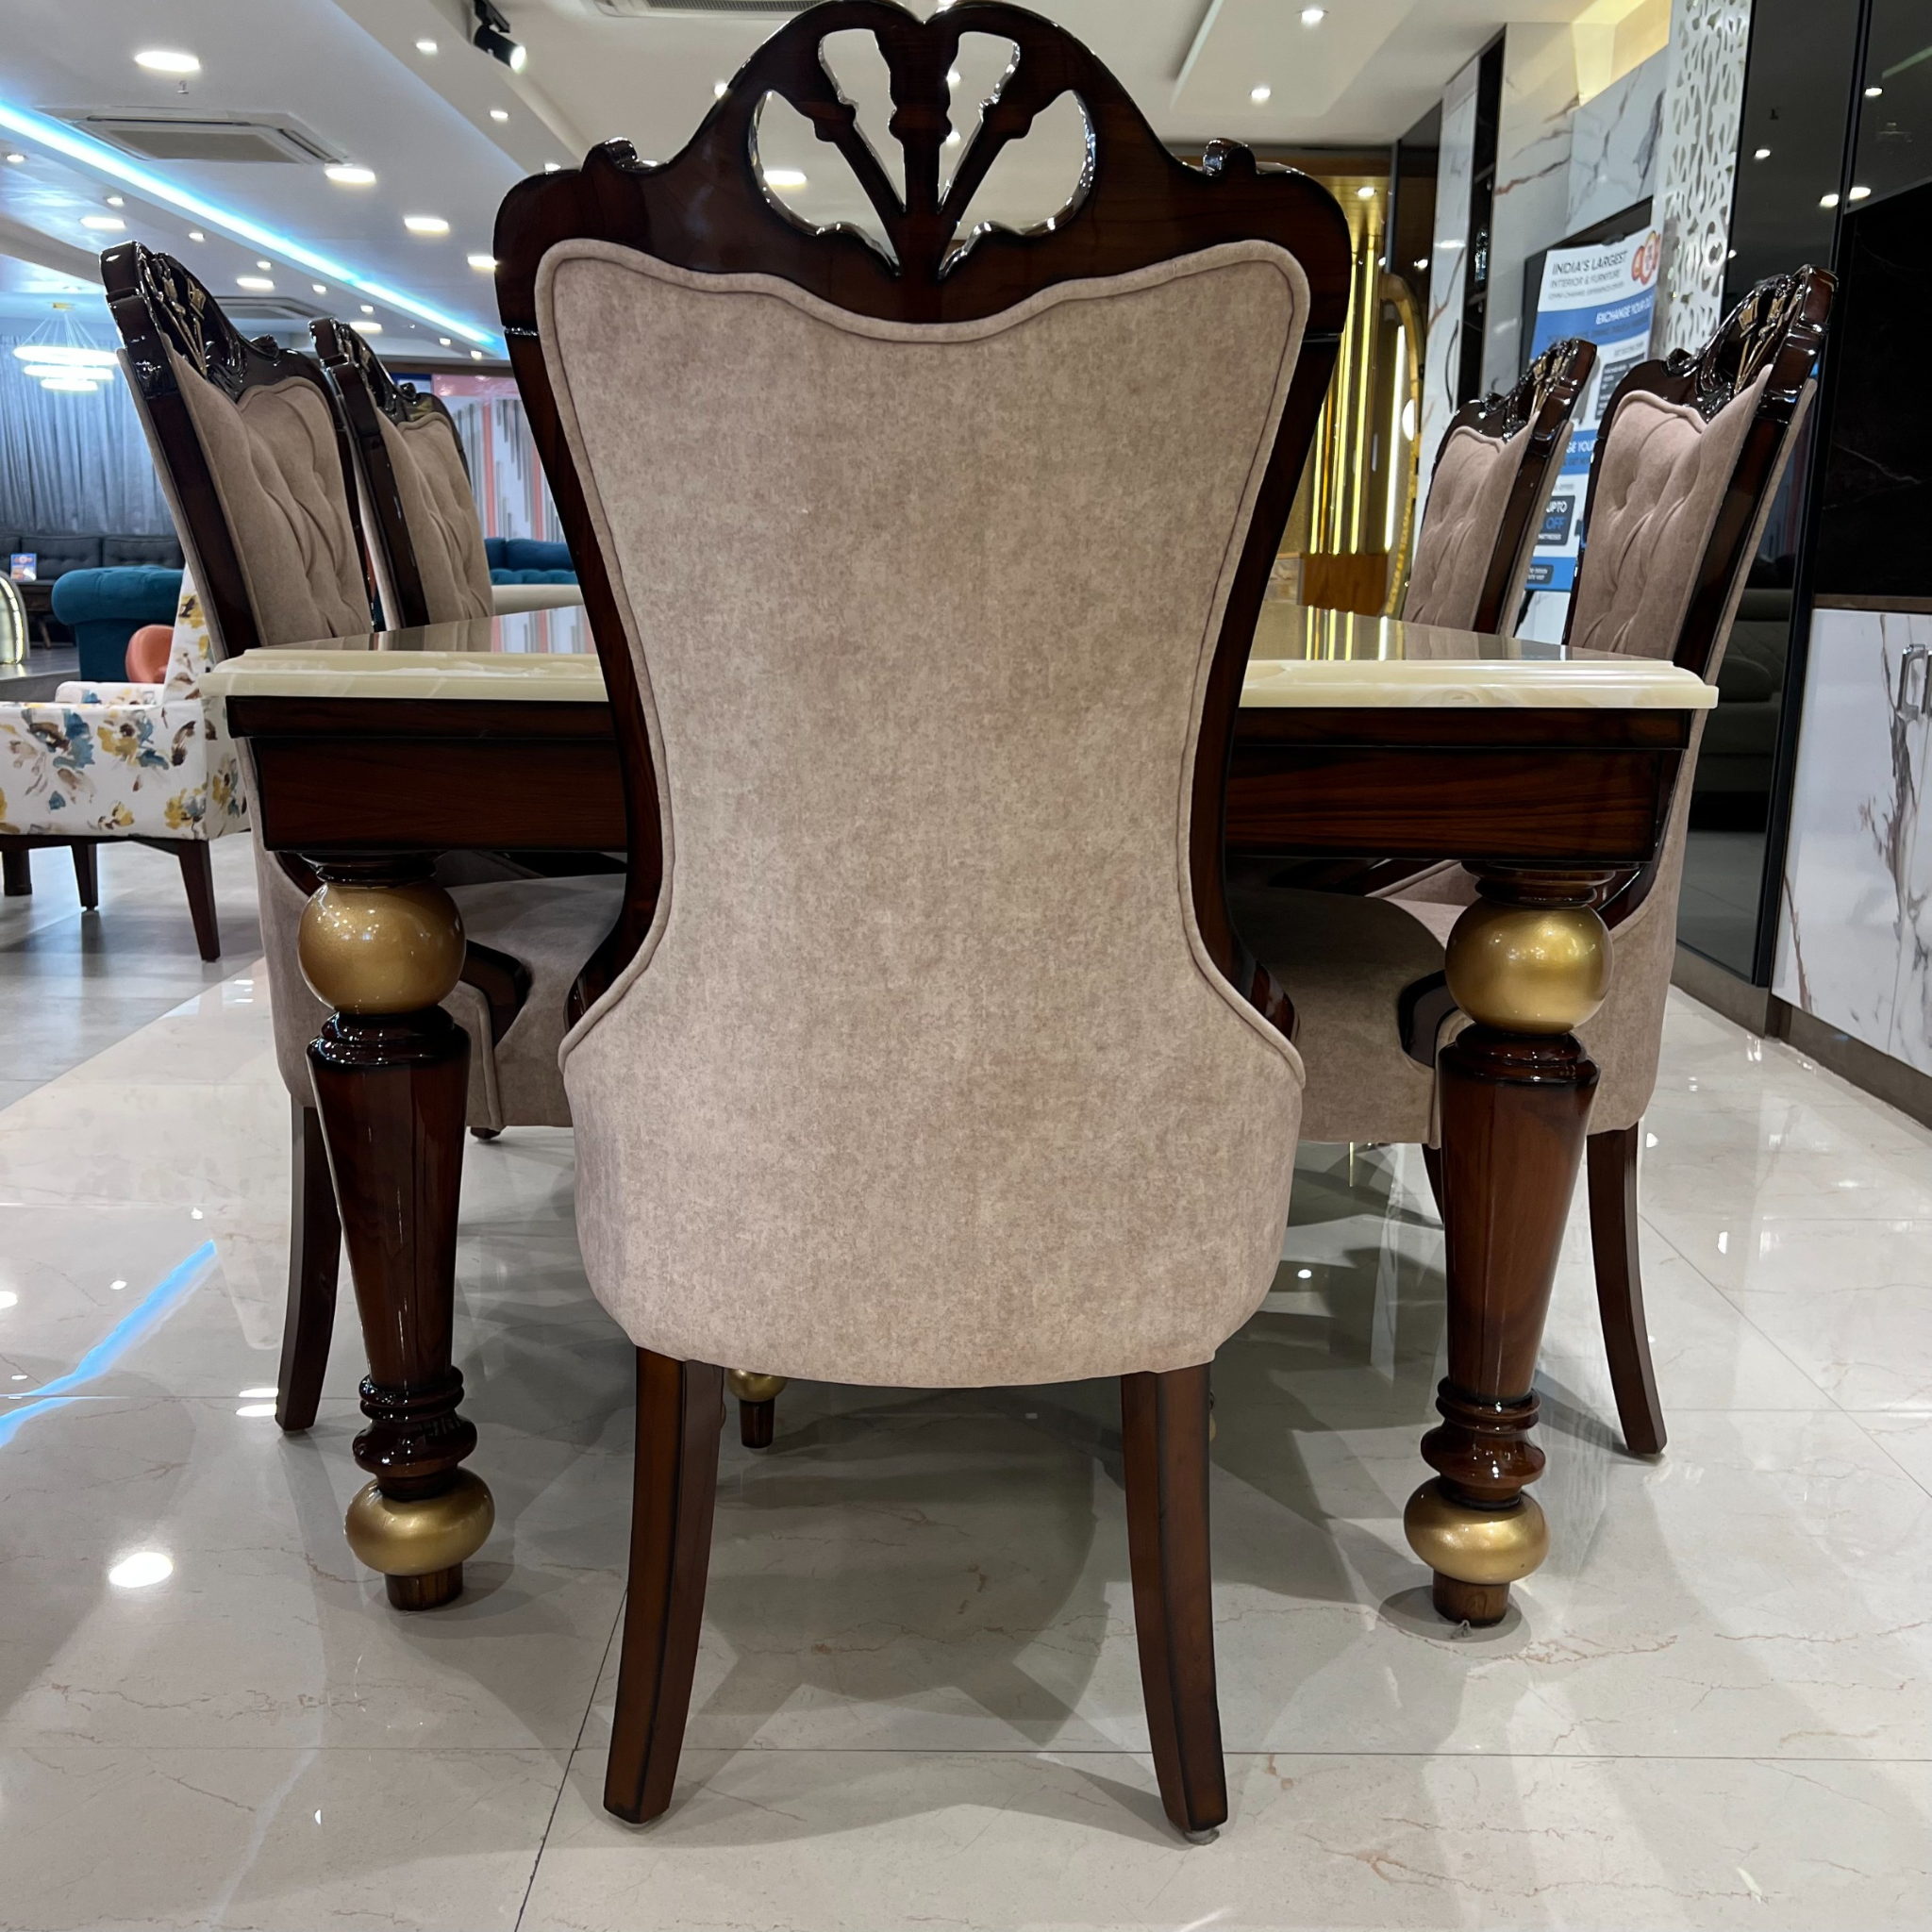 Golden Rose Dining Table with Chair